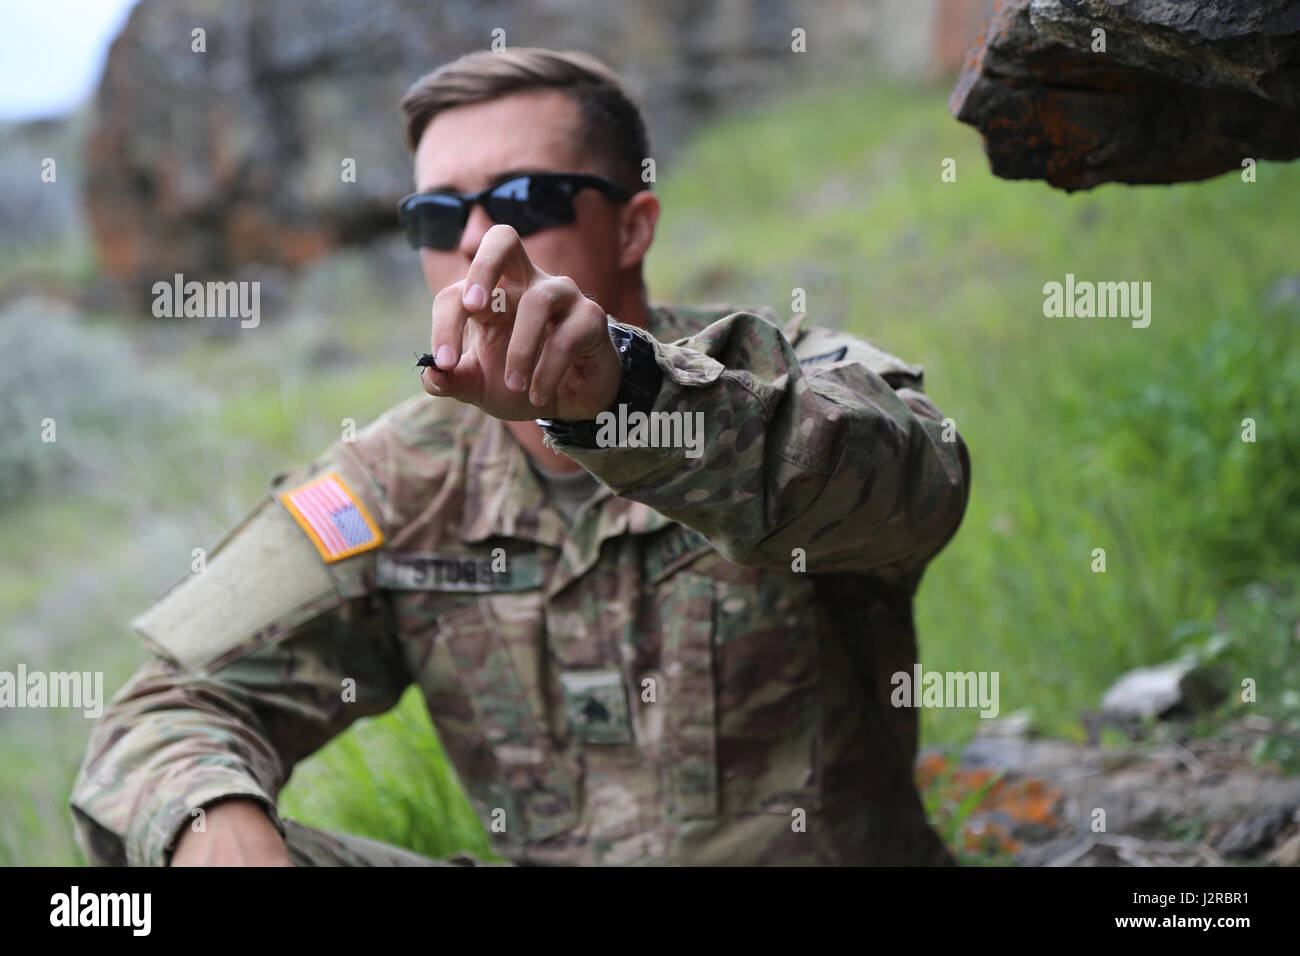 U.S. Army Sgt. Brandon Stubbs, 756th Ordnance Company (EOD), 184th Ordnance Battalion (EOD), 52nd Ordnance Group (EOD), holds a beetle that he found during a Survival, Evasion, Resistance, and Escape class at the Yakima Training Center, Yakima, Wash., April 25, 2017. Soldiers from 20th CBRNE Command's survival training focused on the five basic needs for desert conditions. (U.S. Army photo by Sgt. Kalie Jones) Stock Photo